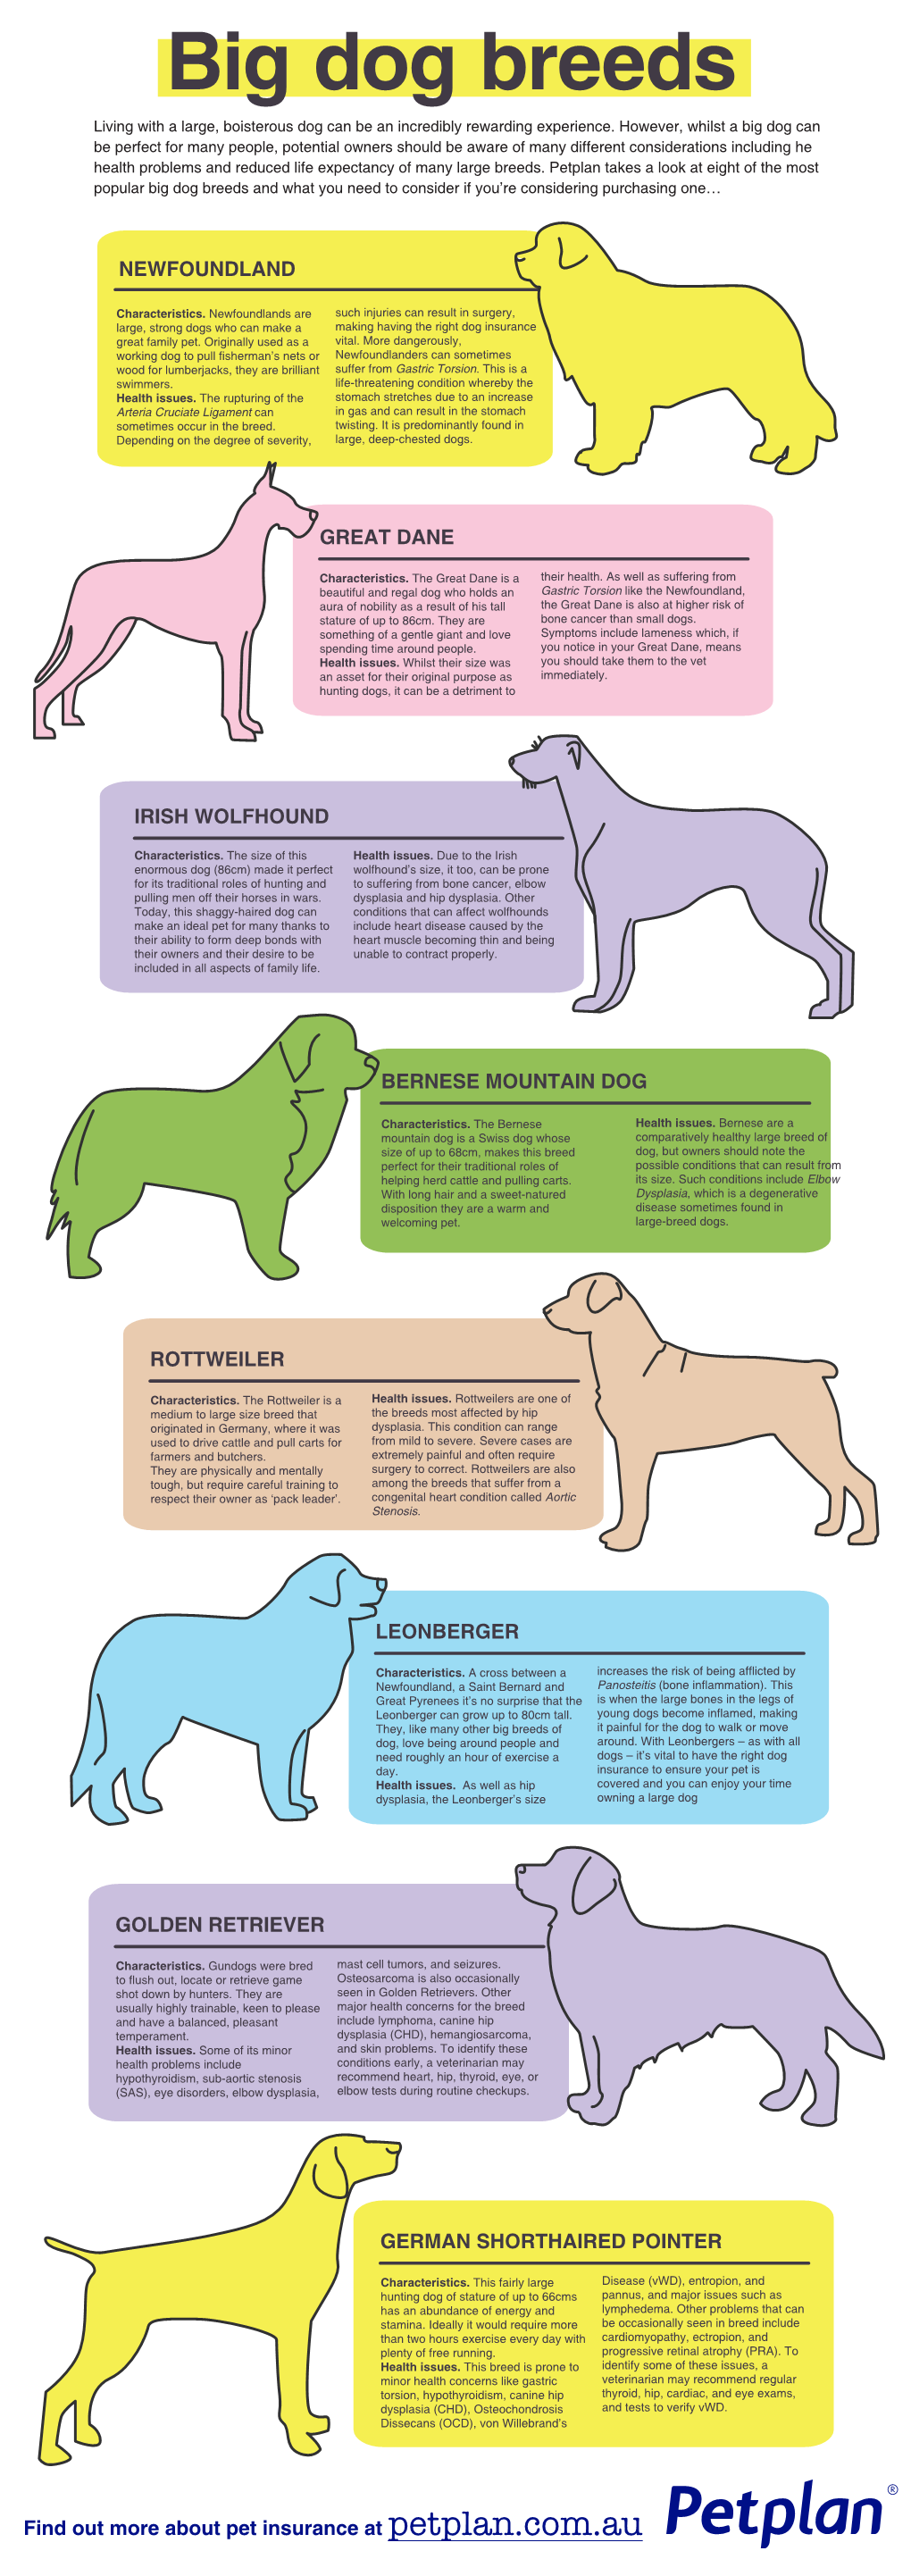 Big Dog Breeds Living with a Large, Boisterous Dog Can Be an Incredibly Rewarding Experience